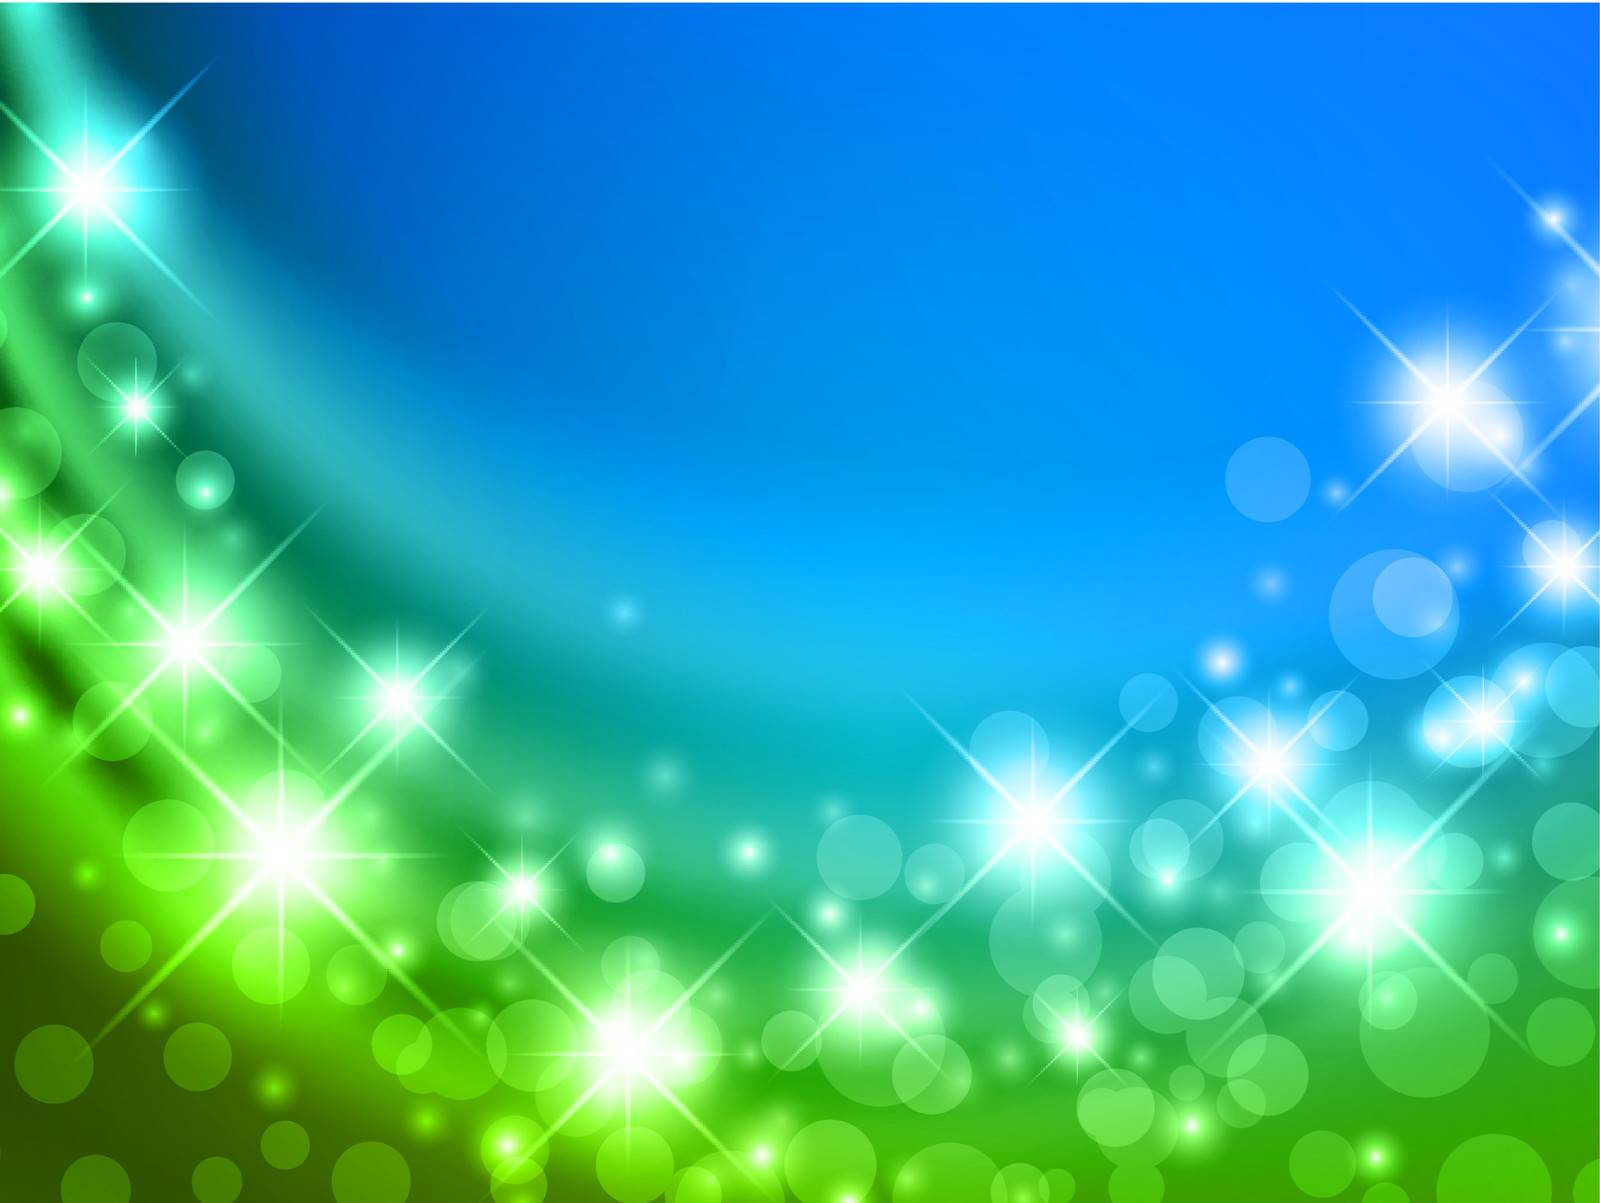 blue and green abstract curtain with shining stars and copyspace for your text